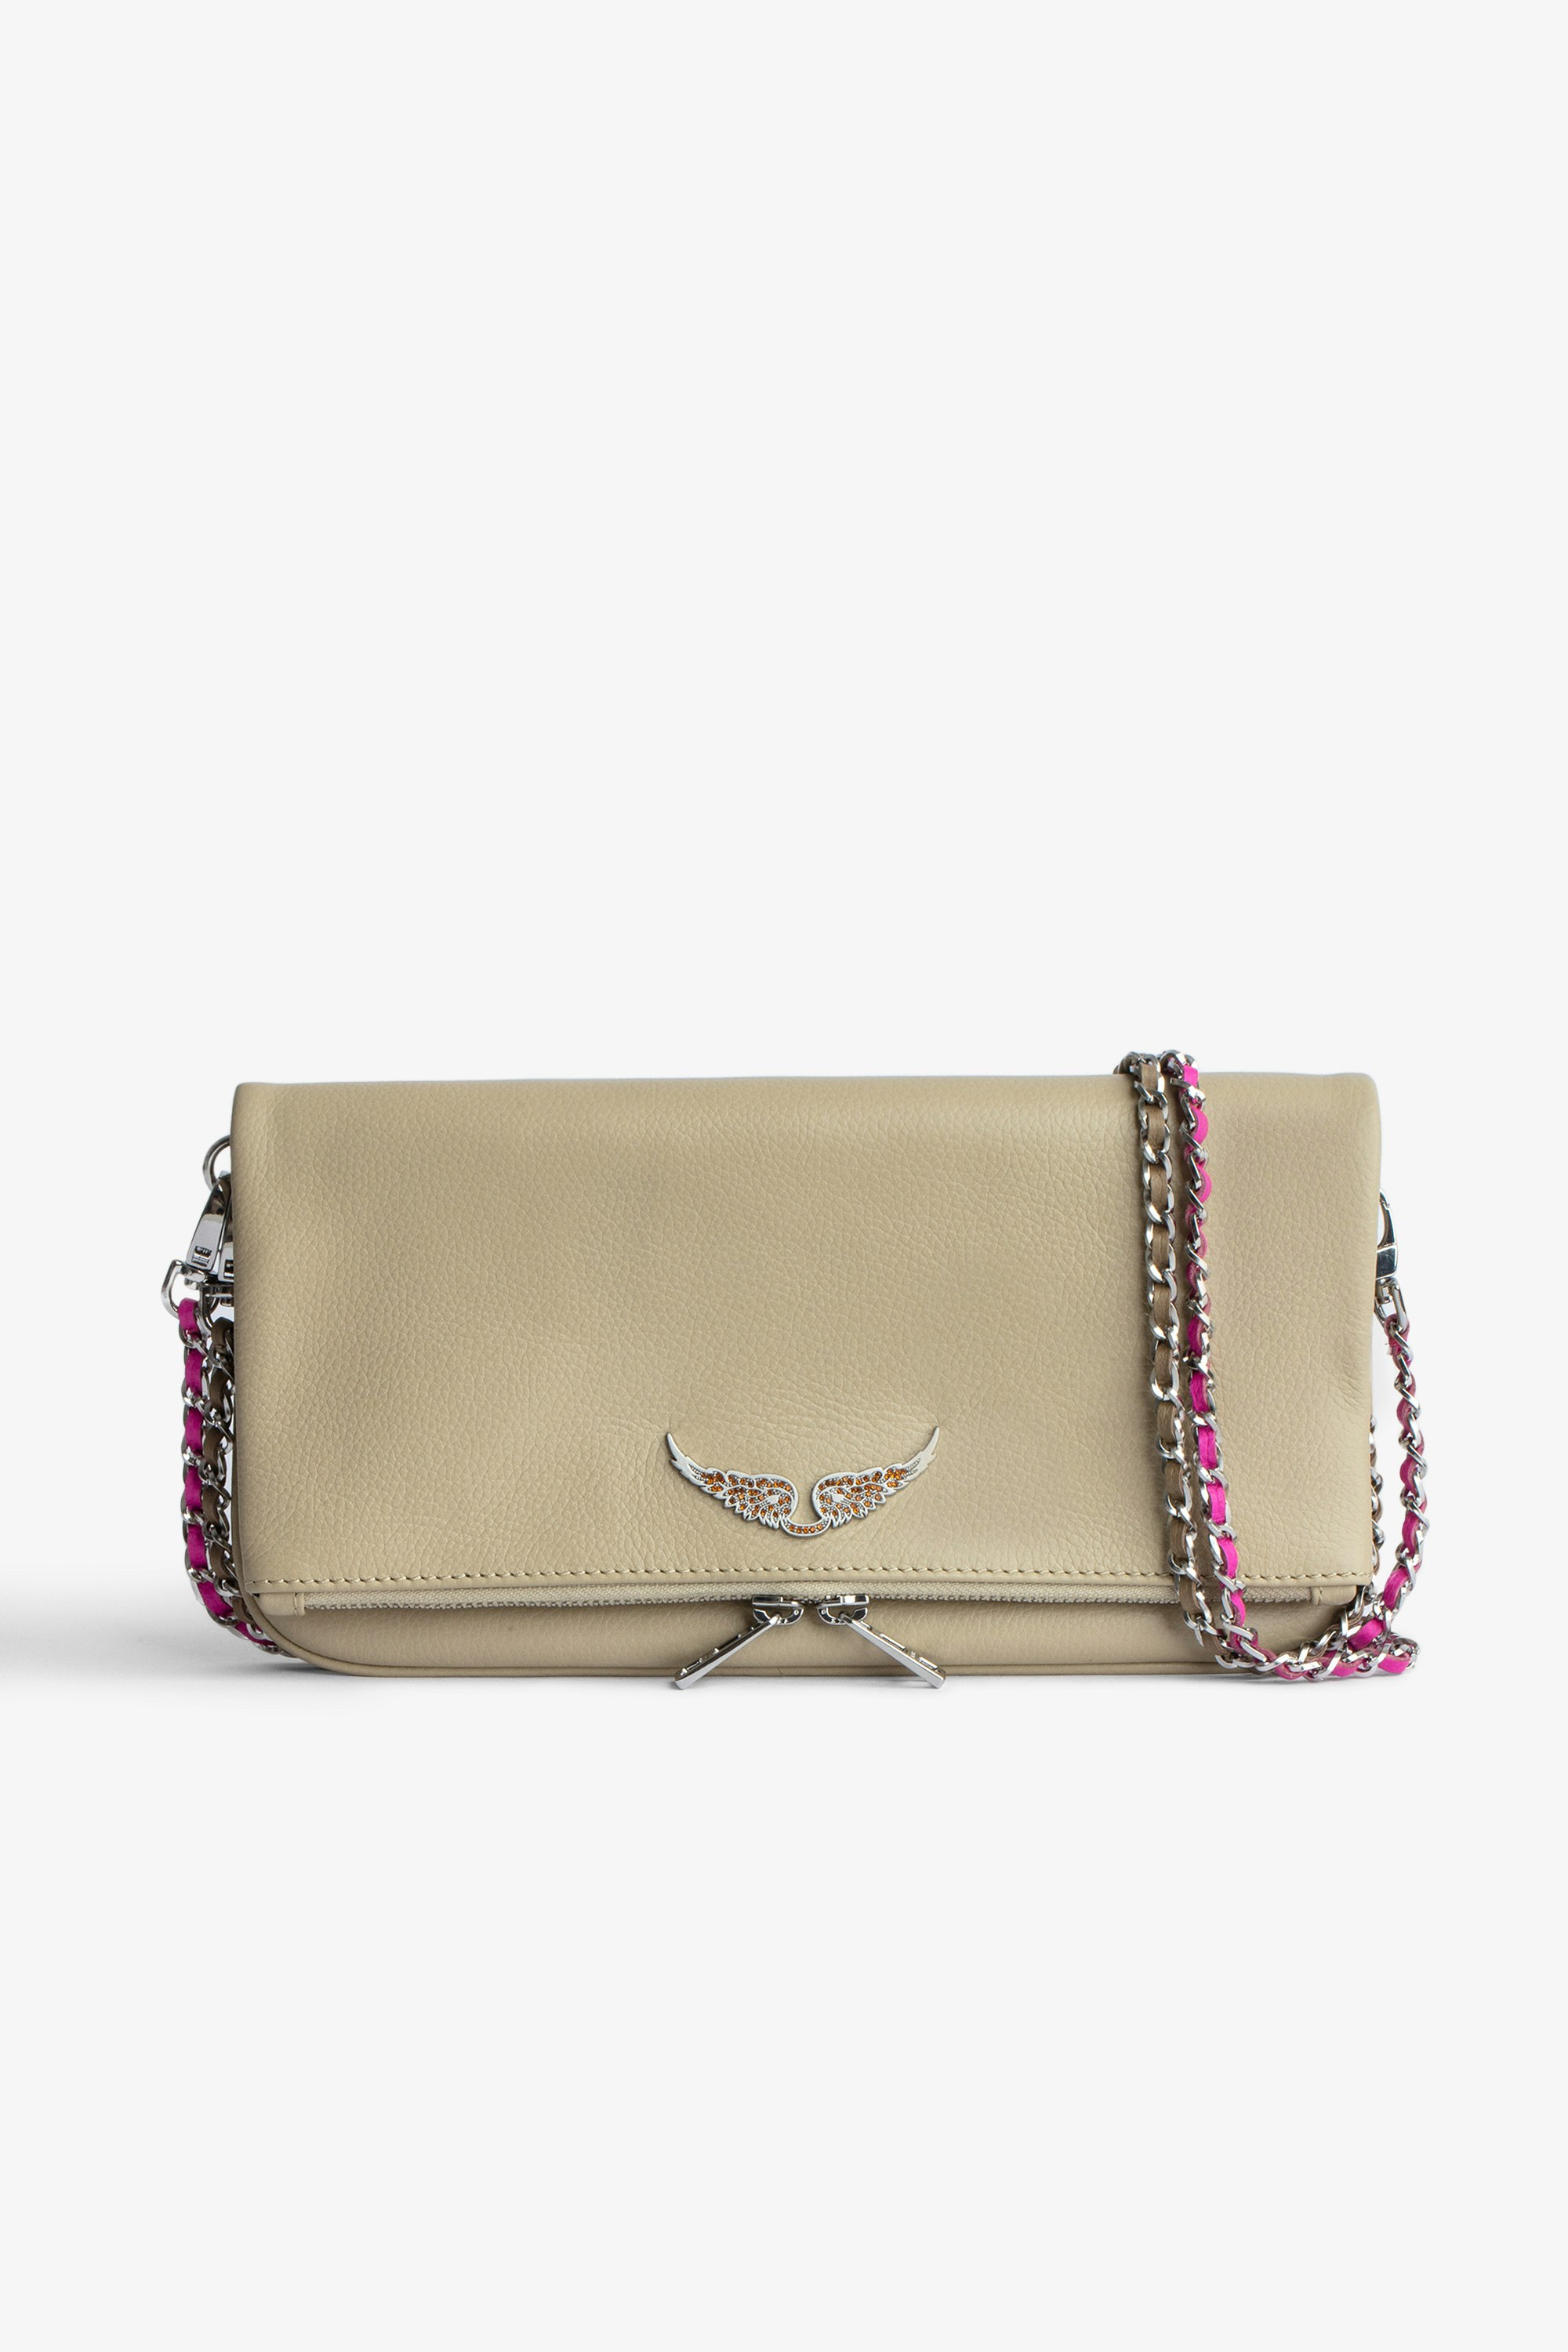 Rock クラッチバッグ Women’s beige leather zipped clutch with leather and chain shoulder strap